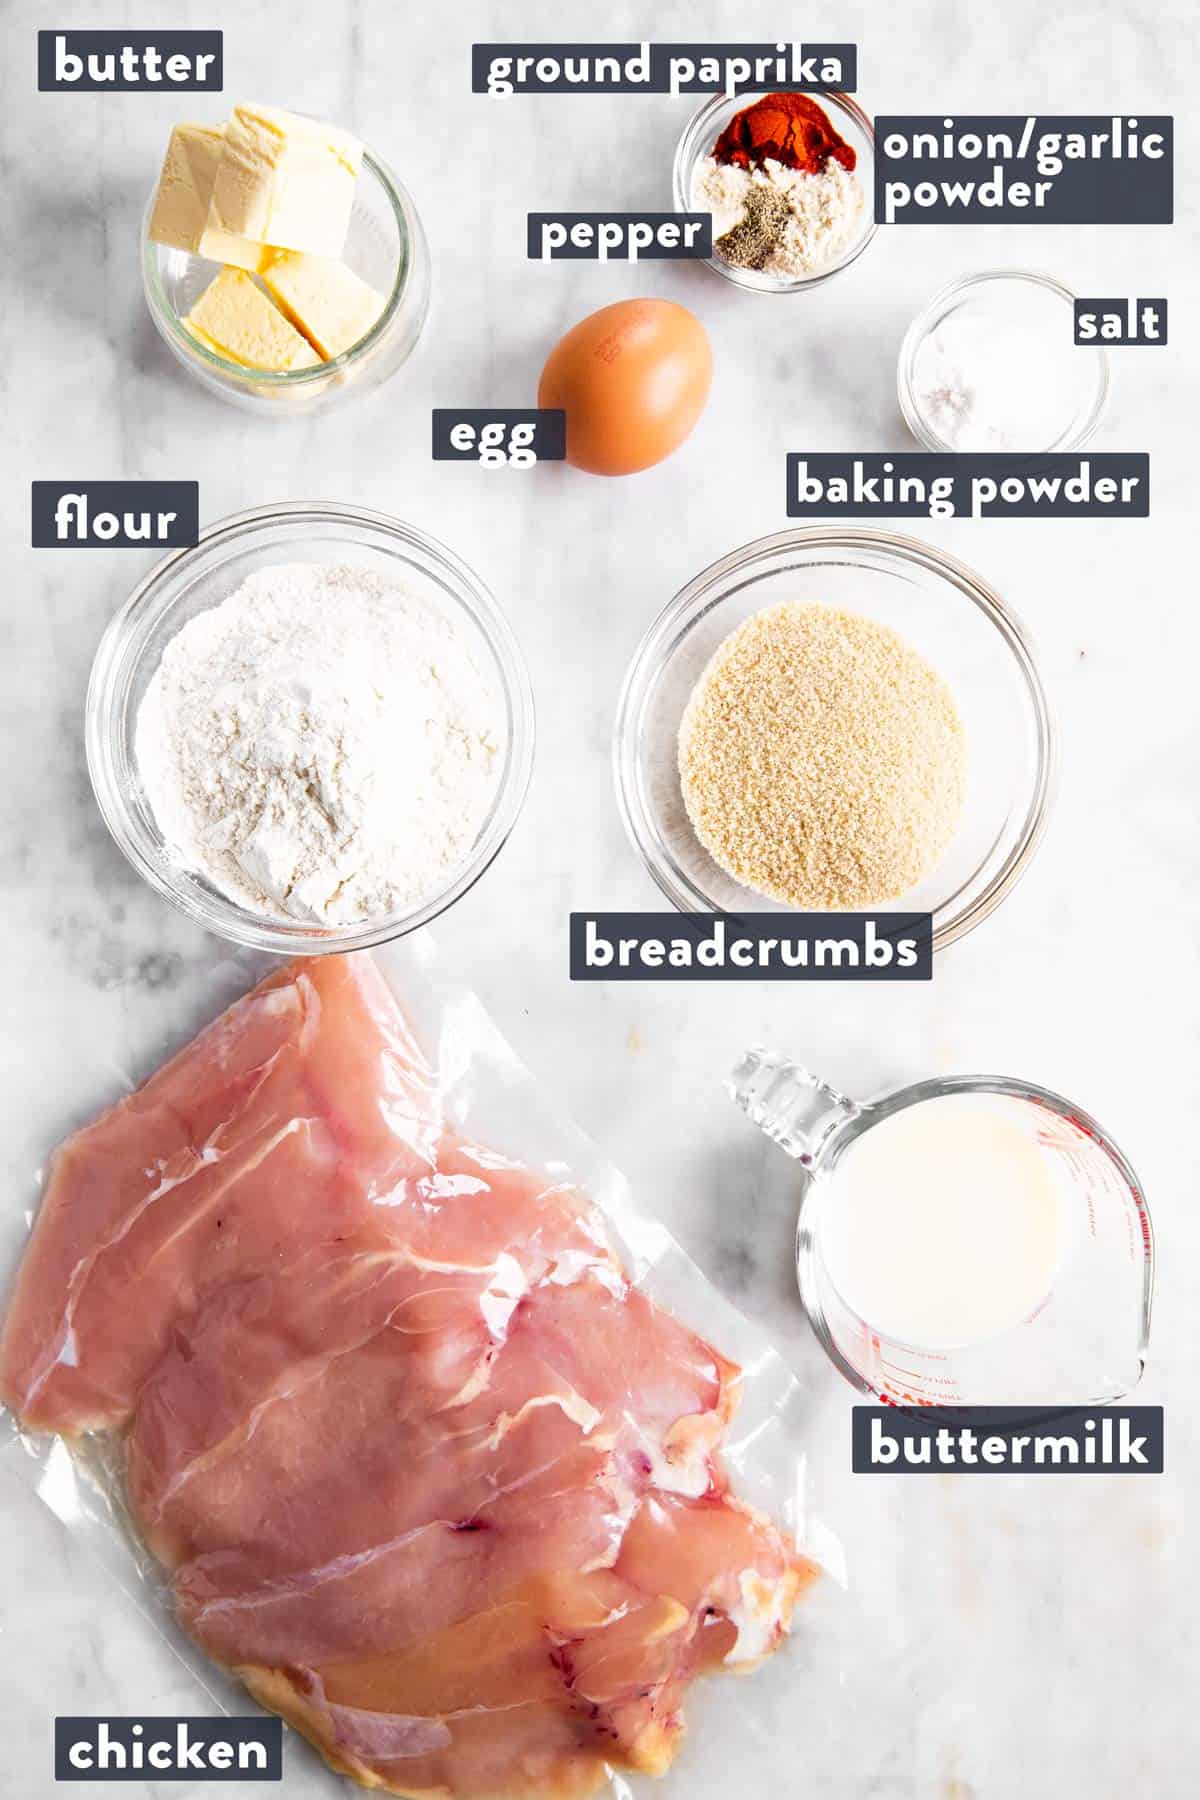 ingredients for oven fried chicken with text labels